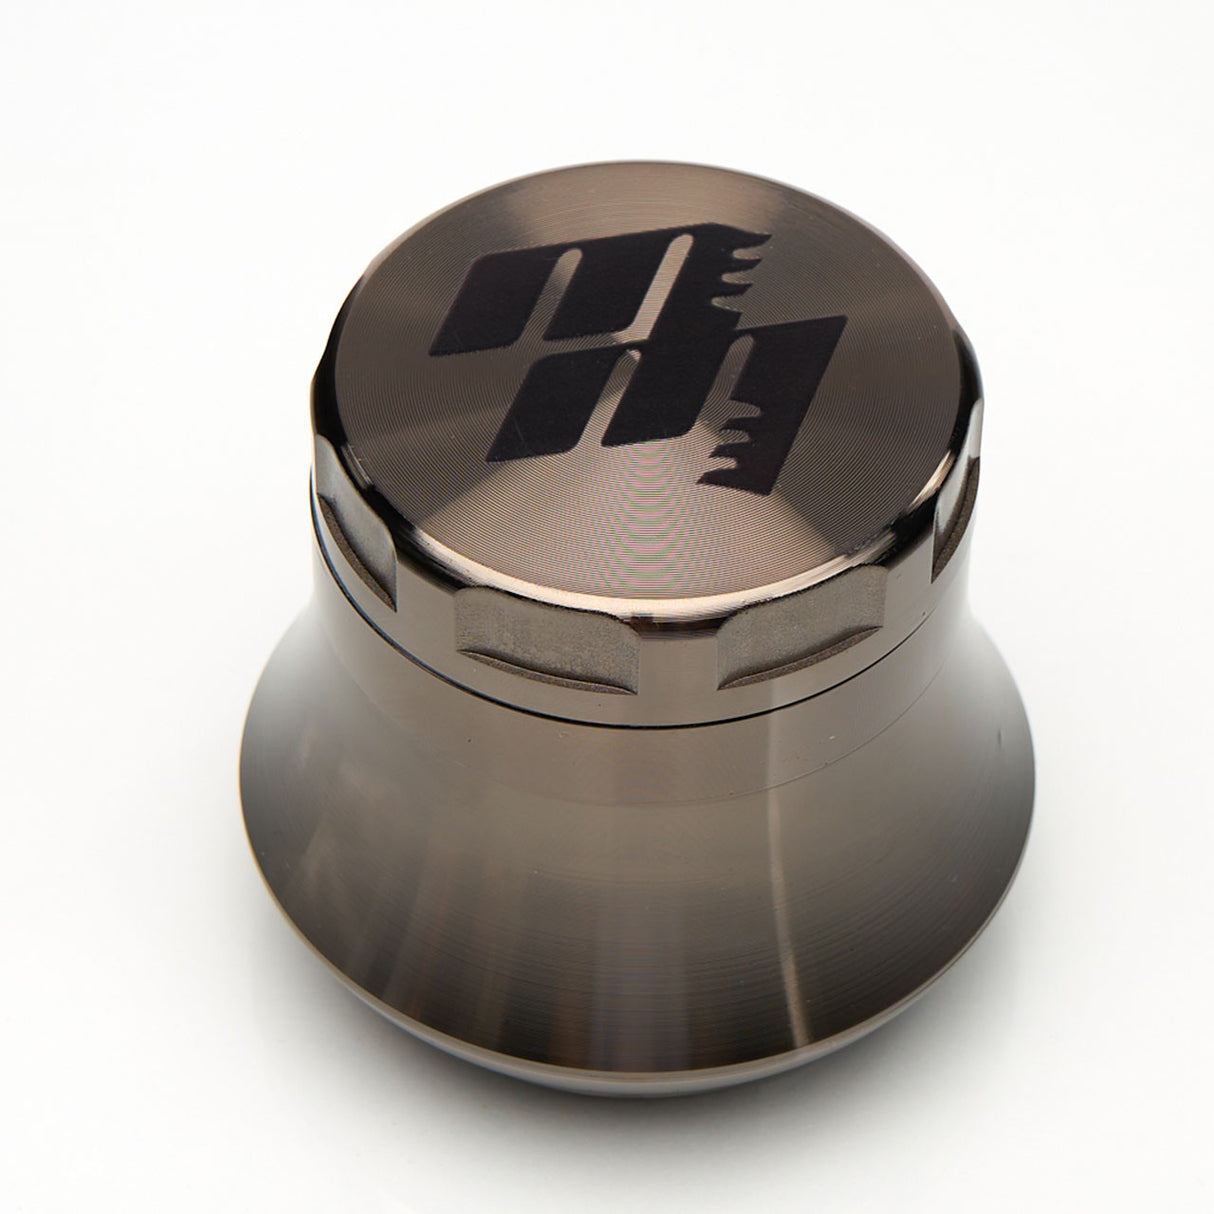 MOB Mulcher UFO 4-piece herb grinder with stainless steel screen and scraper. Comes in black, rose, black and rose gold, and rose gold and black